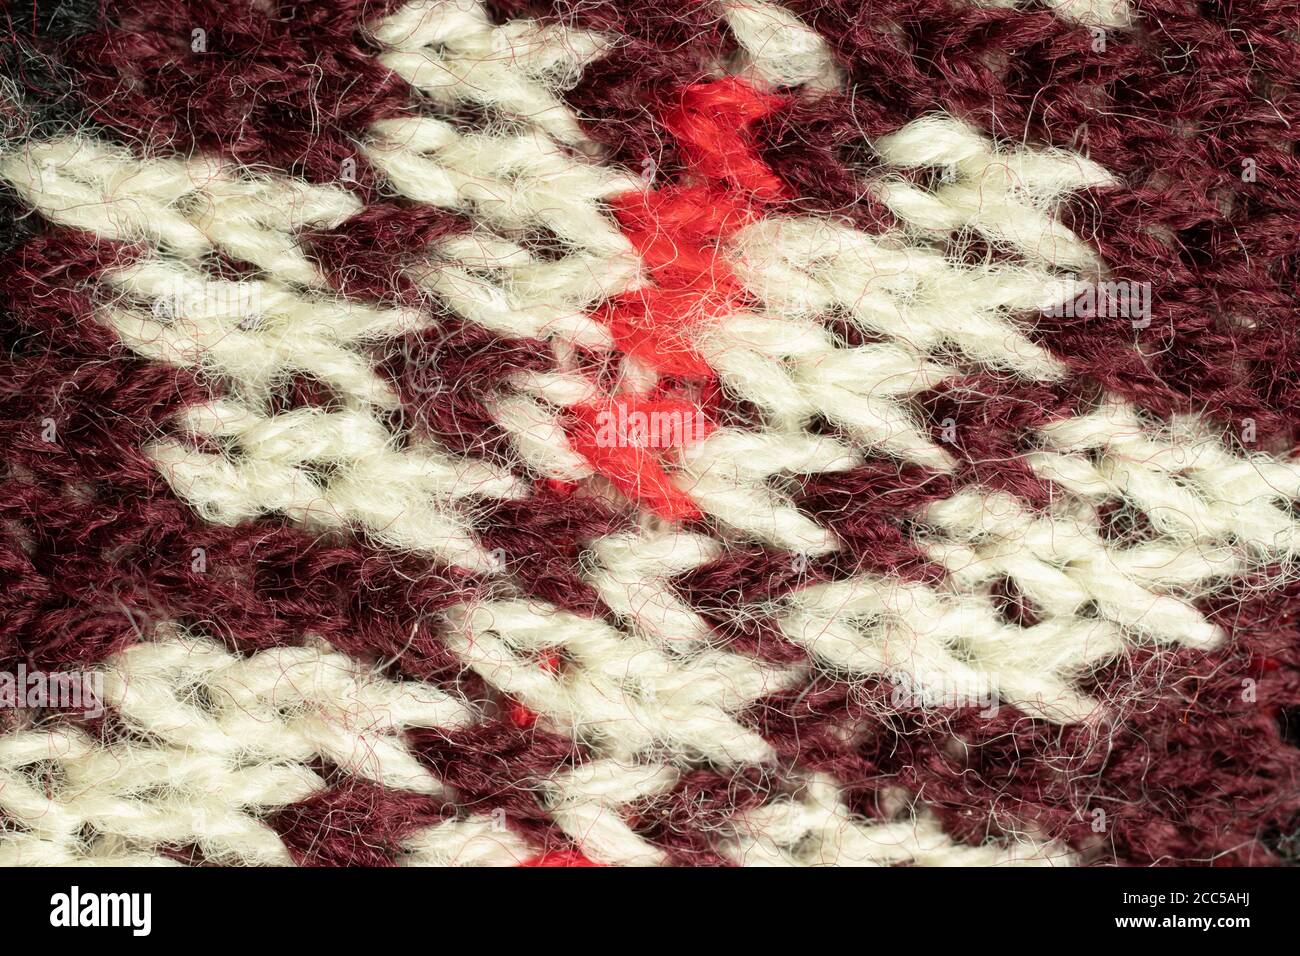 White and red wool texture background. Pattern textile Stock Photo